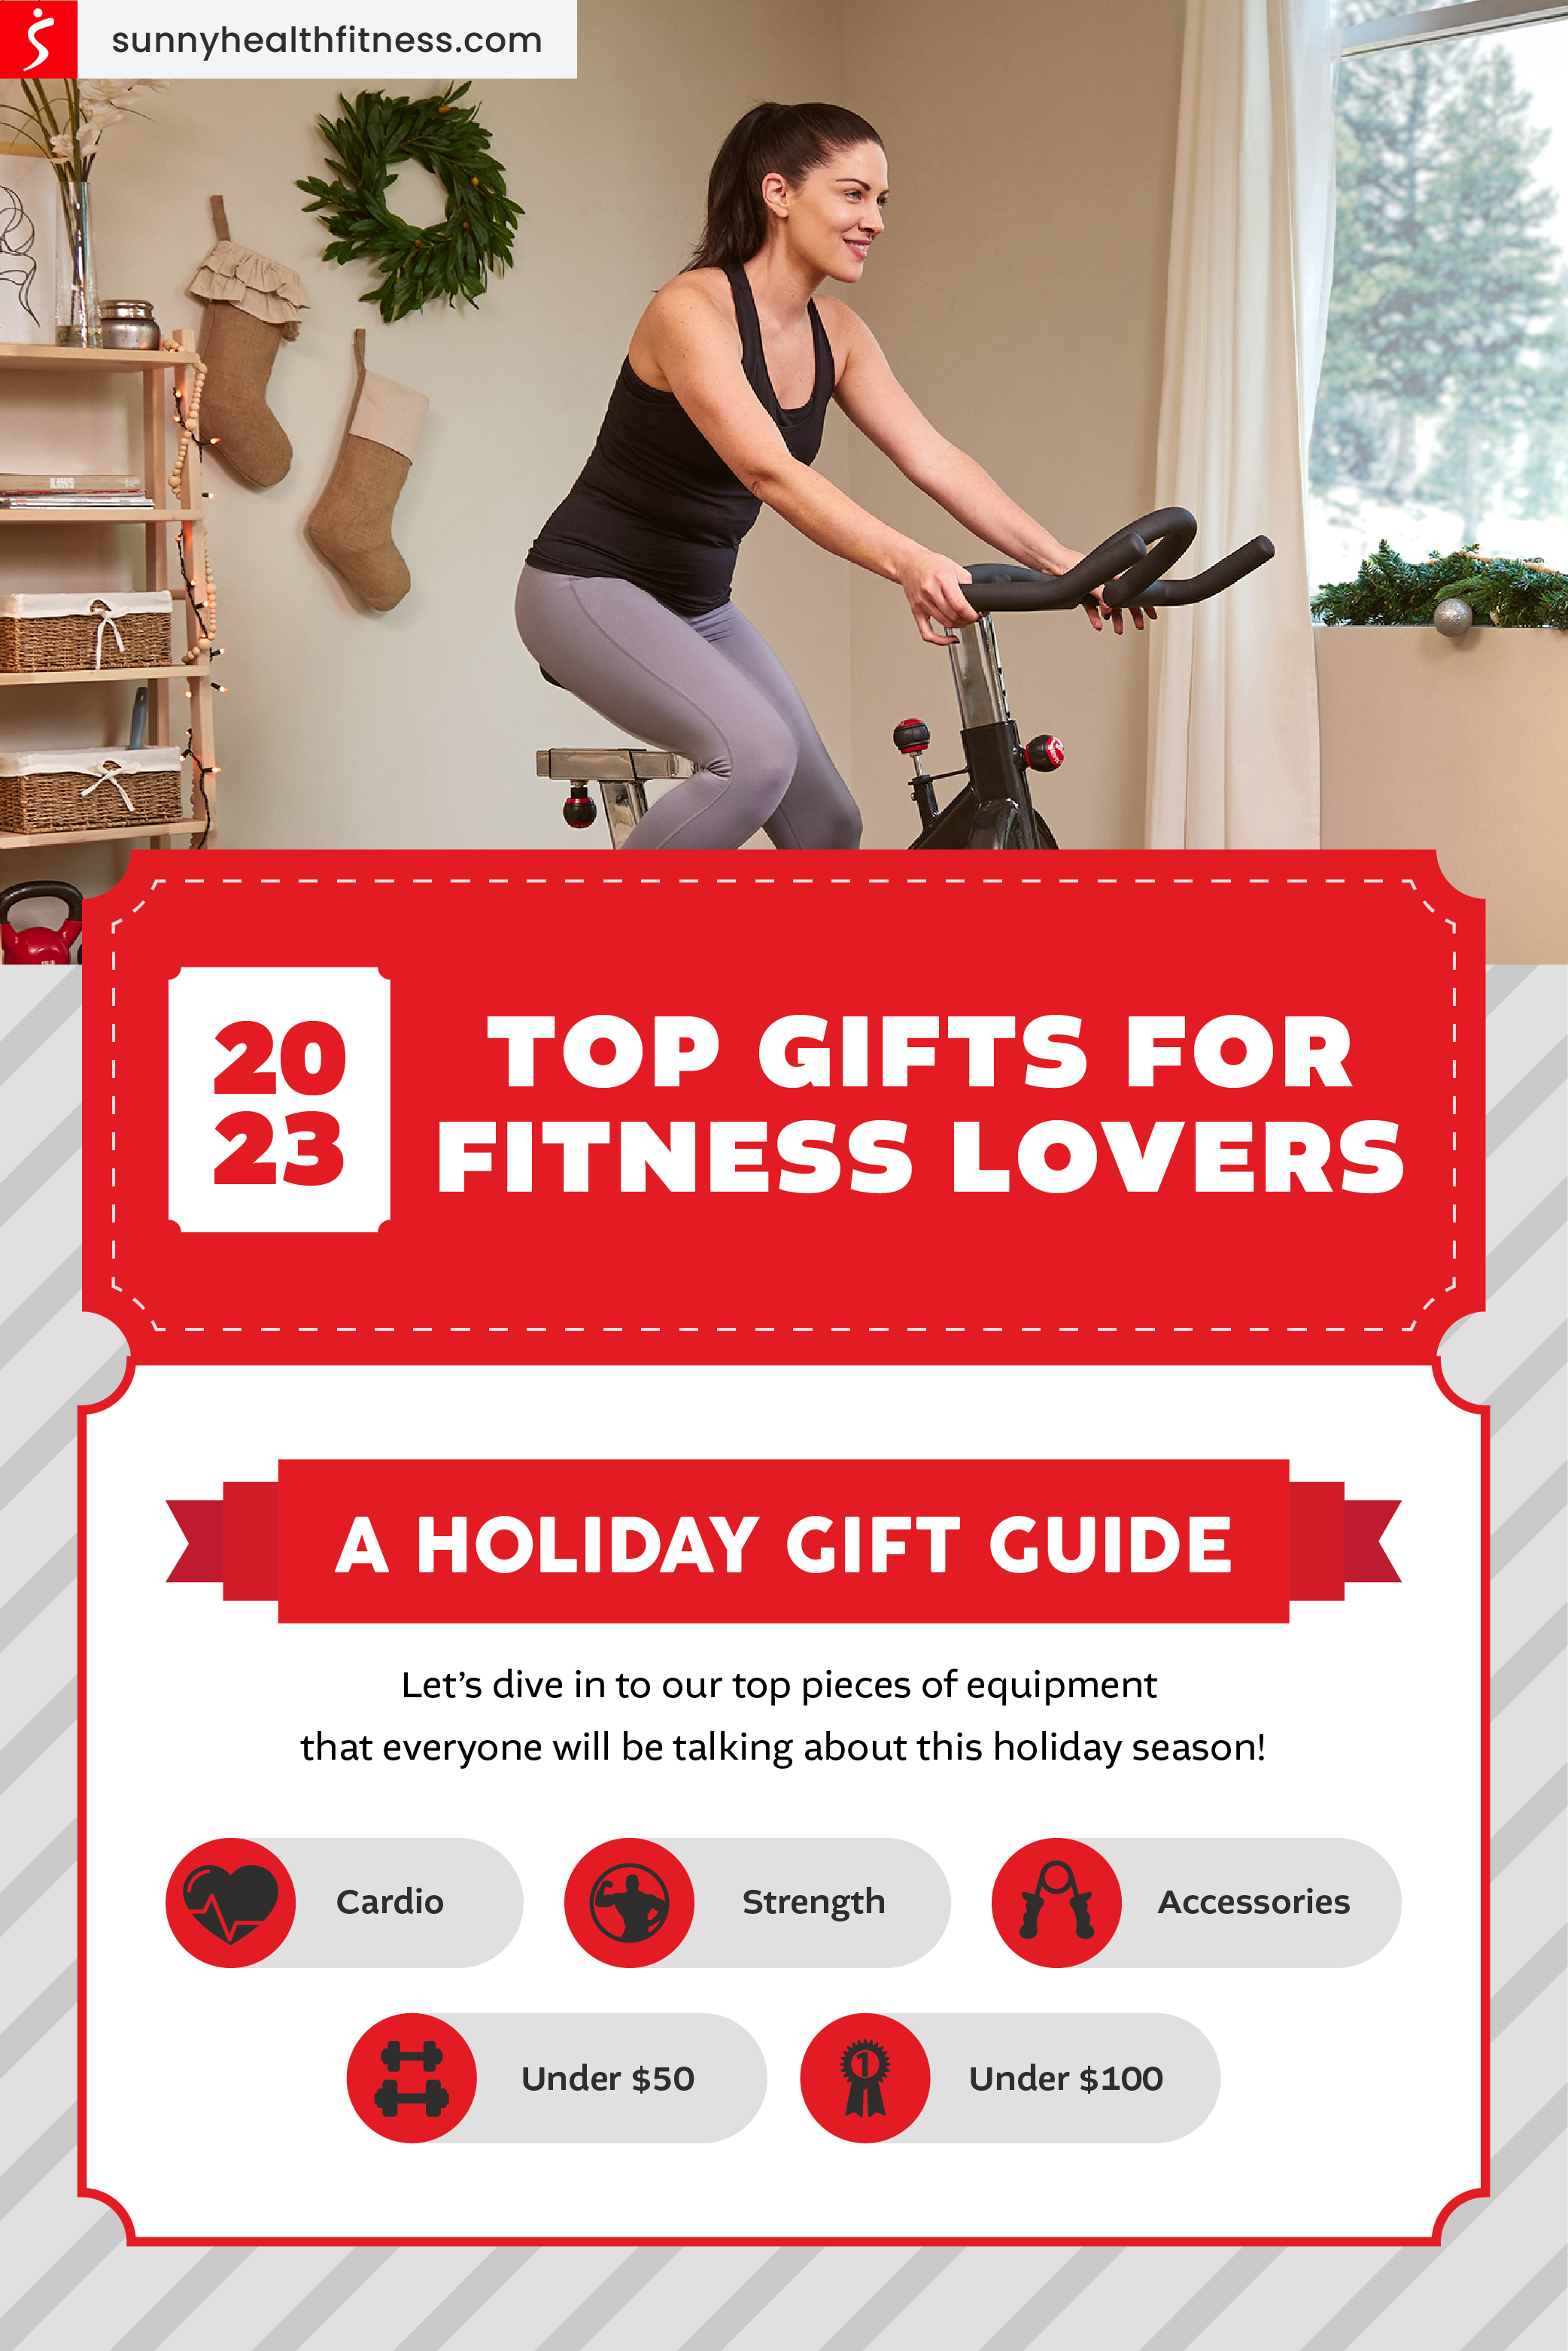 https://cdn.shopify.com/s/files/1/0052/7043/7978/files/gifts-for-fitness-enthusiasts-holiday-gift-guide-infographic-02.png?v=1702685960